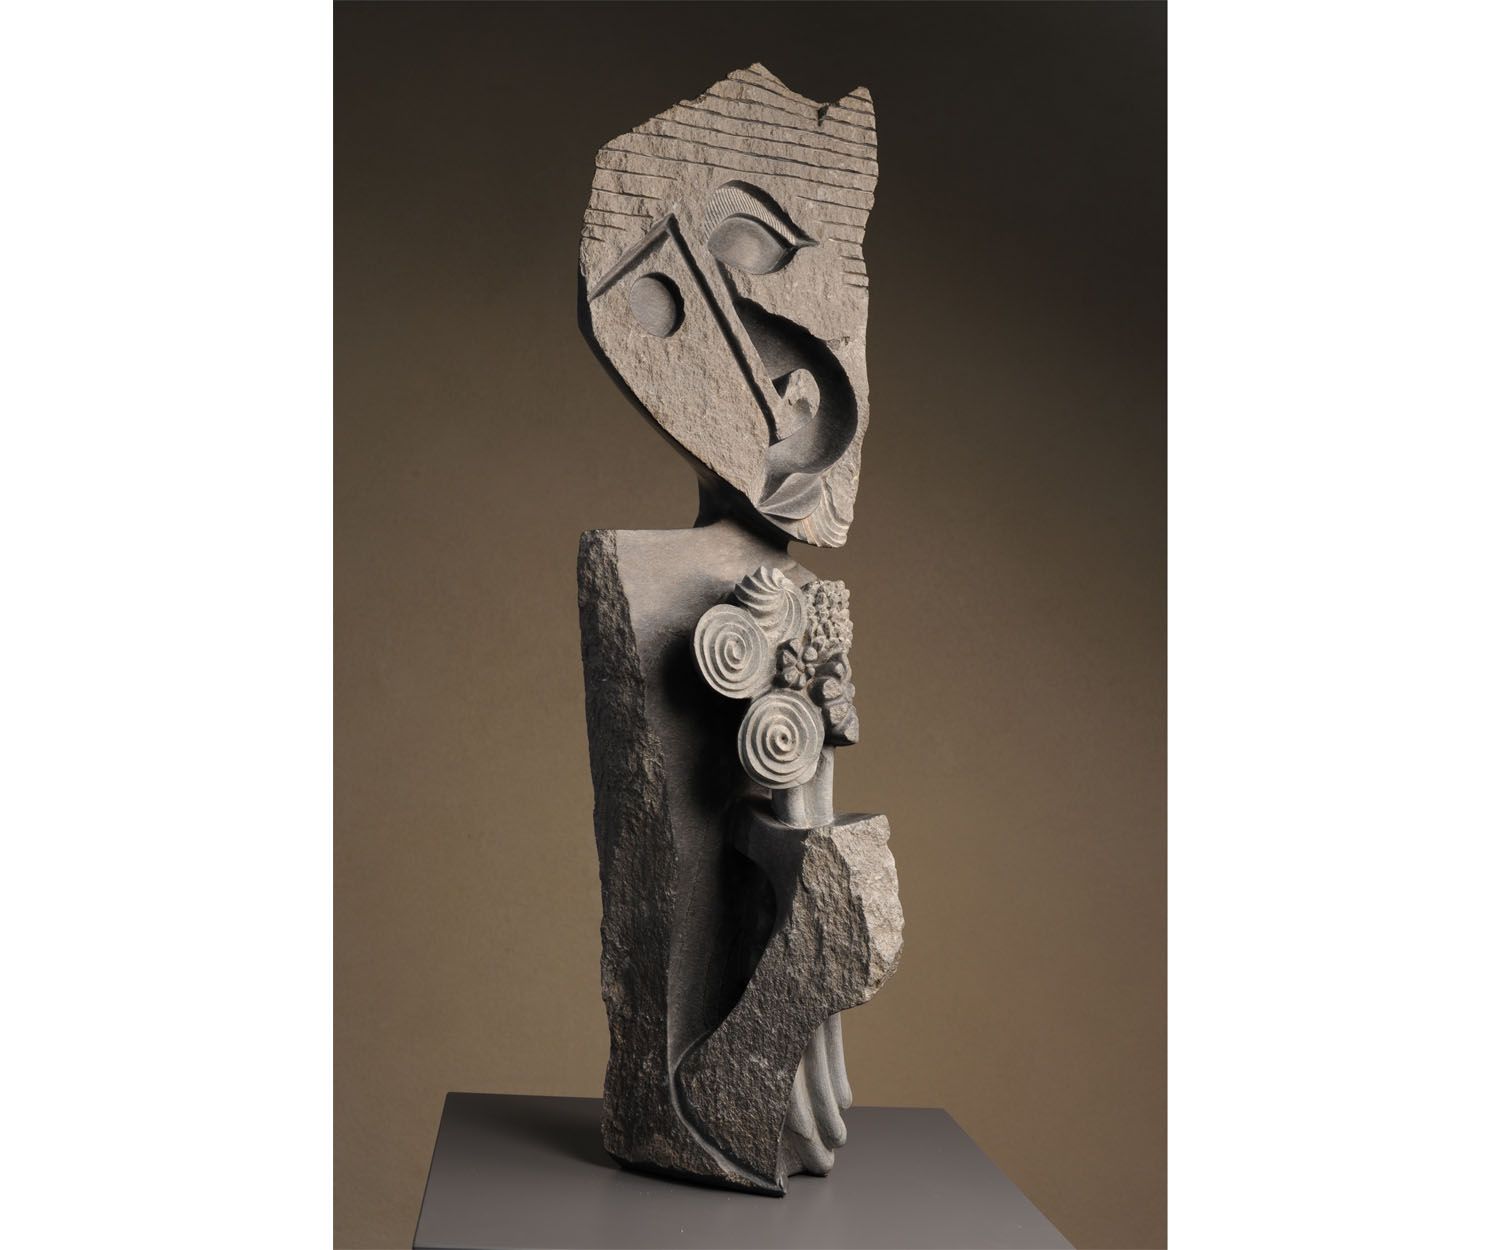 The Woman of the Flowers, 78 x 28 cm, Amos Supuni